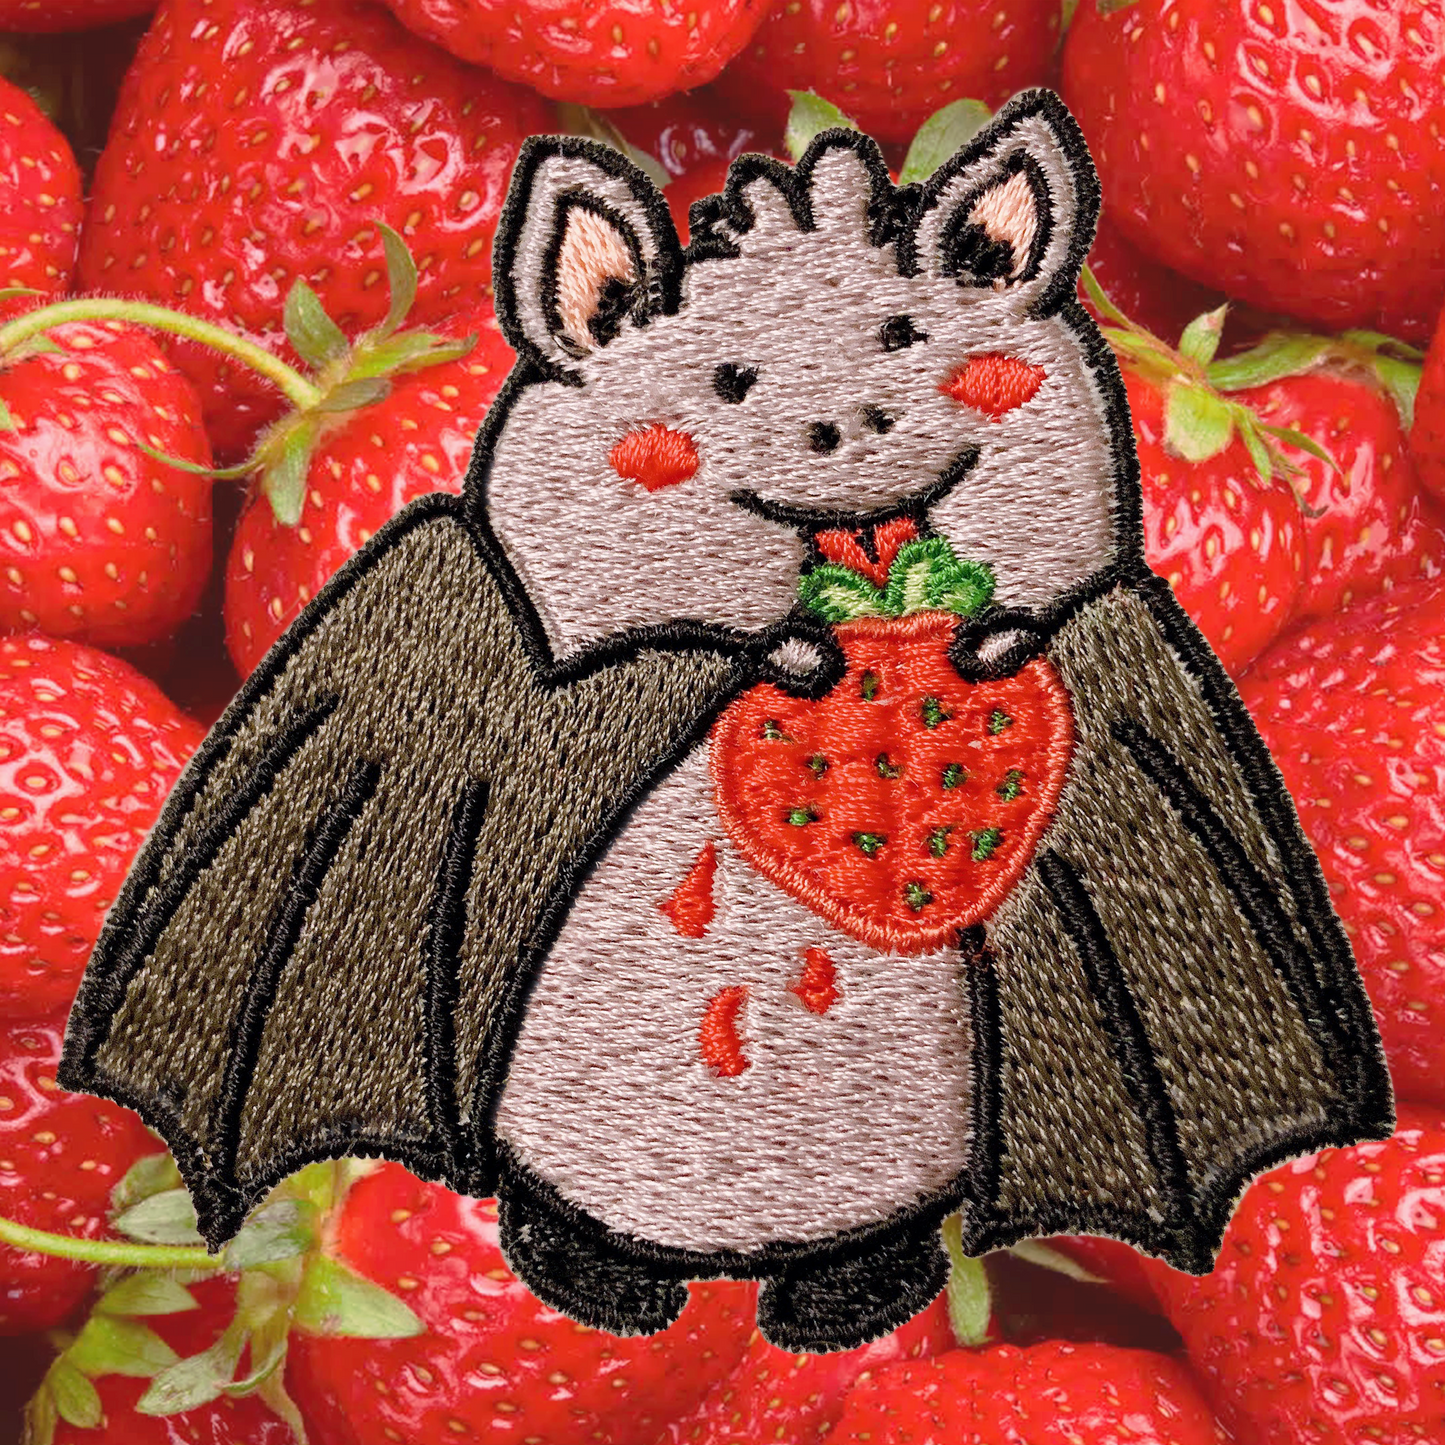 Fruit Bat Embroidered Patch!